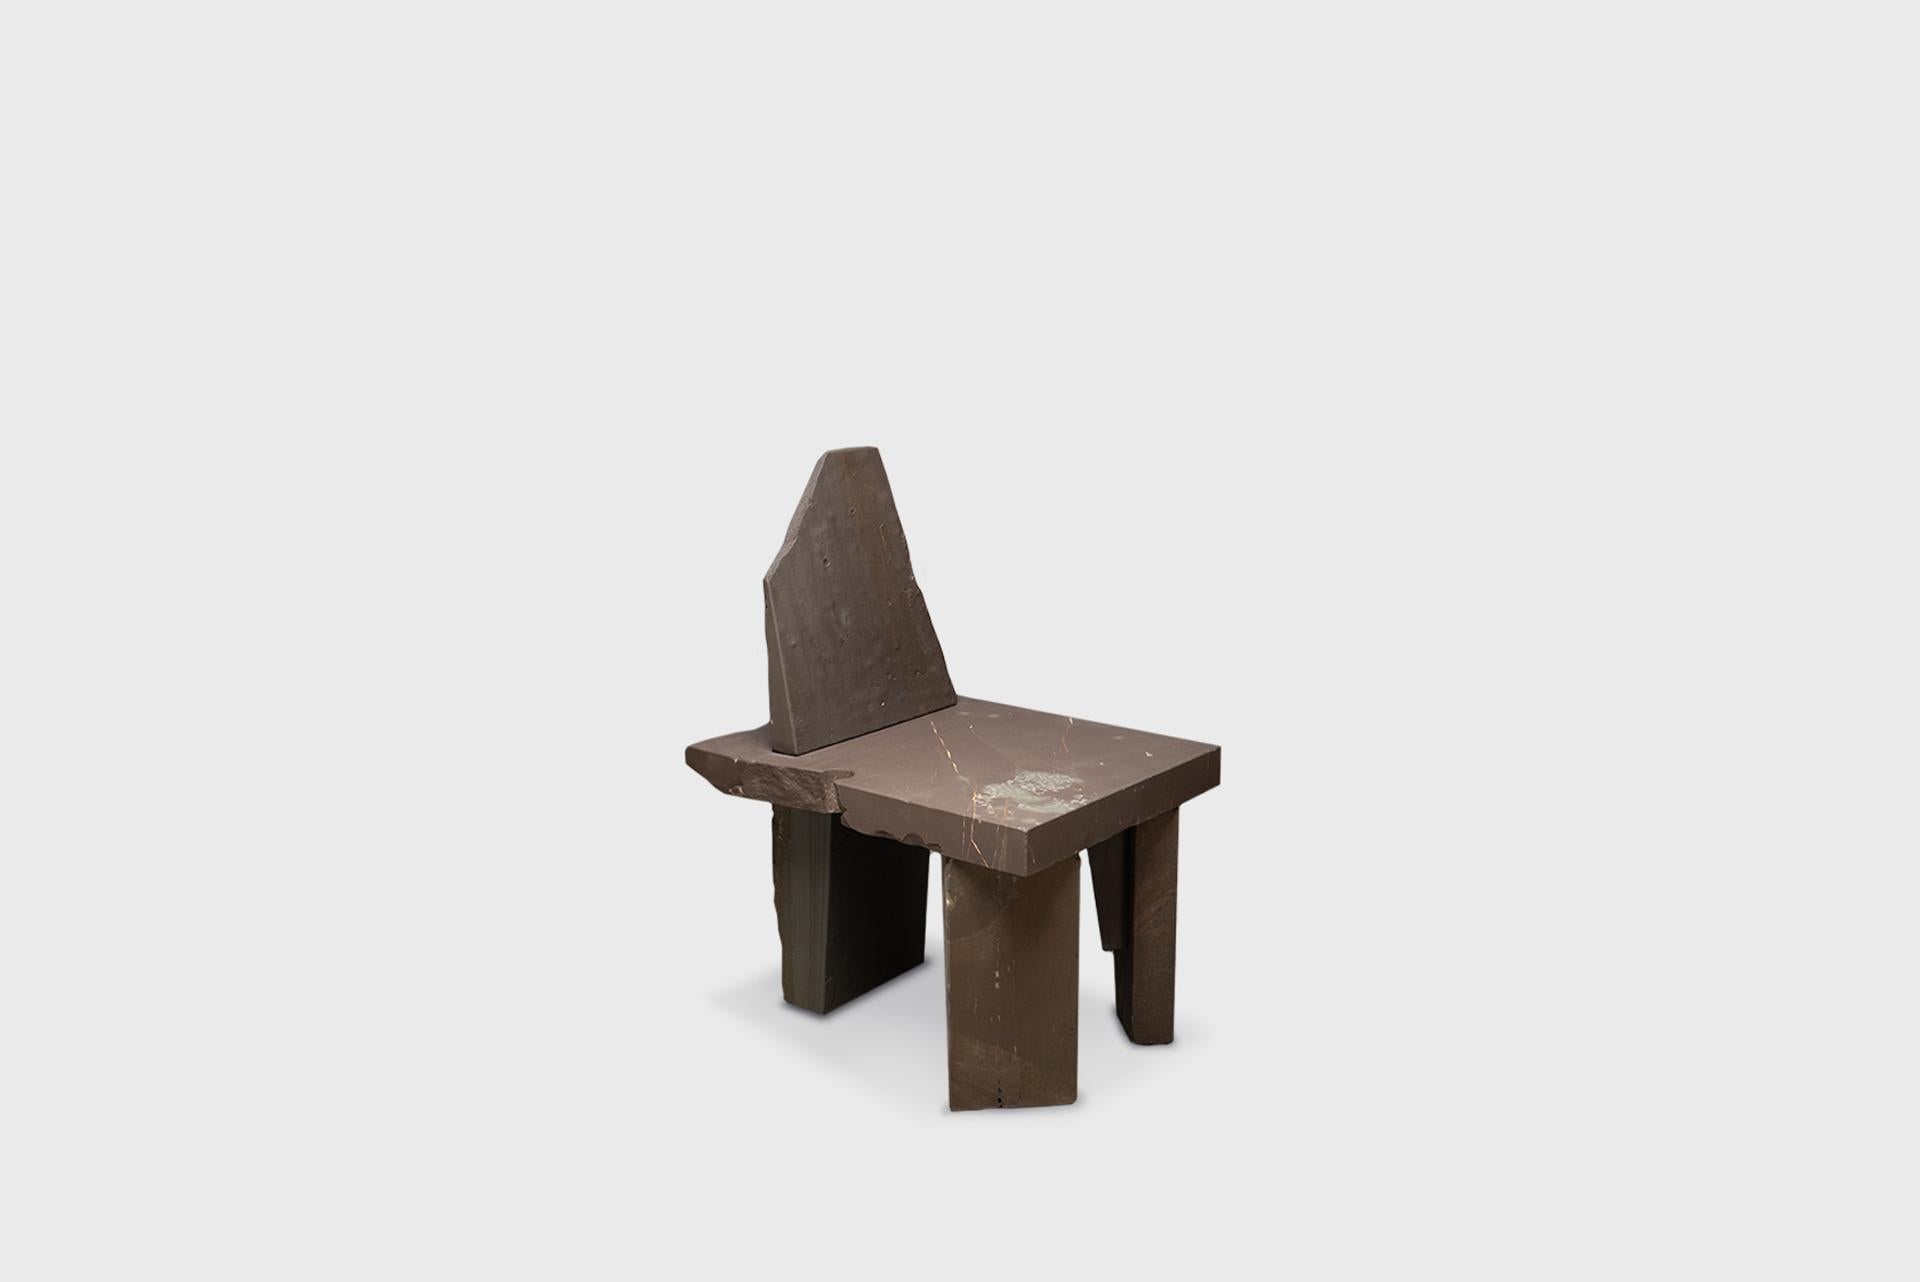 Contemporary Natural Chair 20, Graywacke Offcut Gray Stone, Carsten in Der Elst For Sale 3